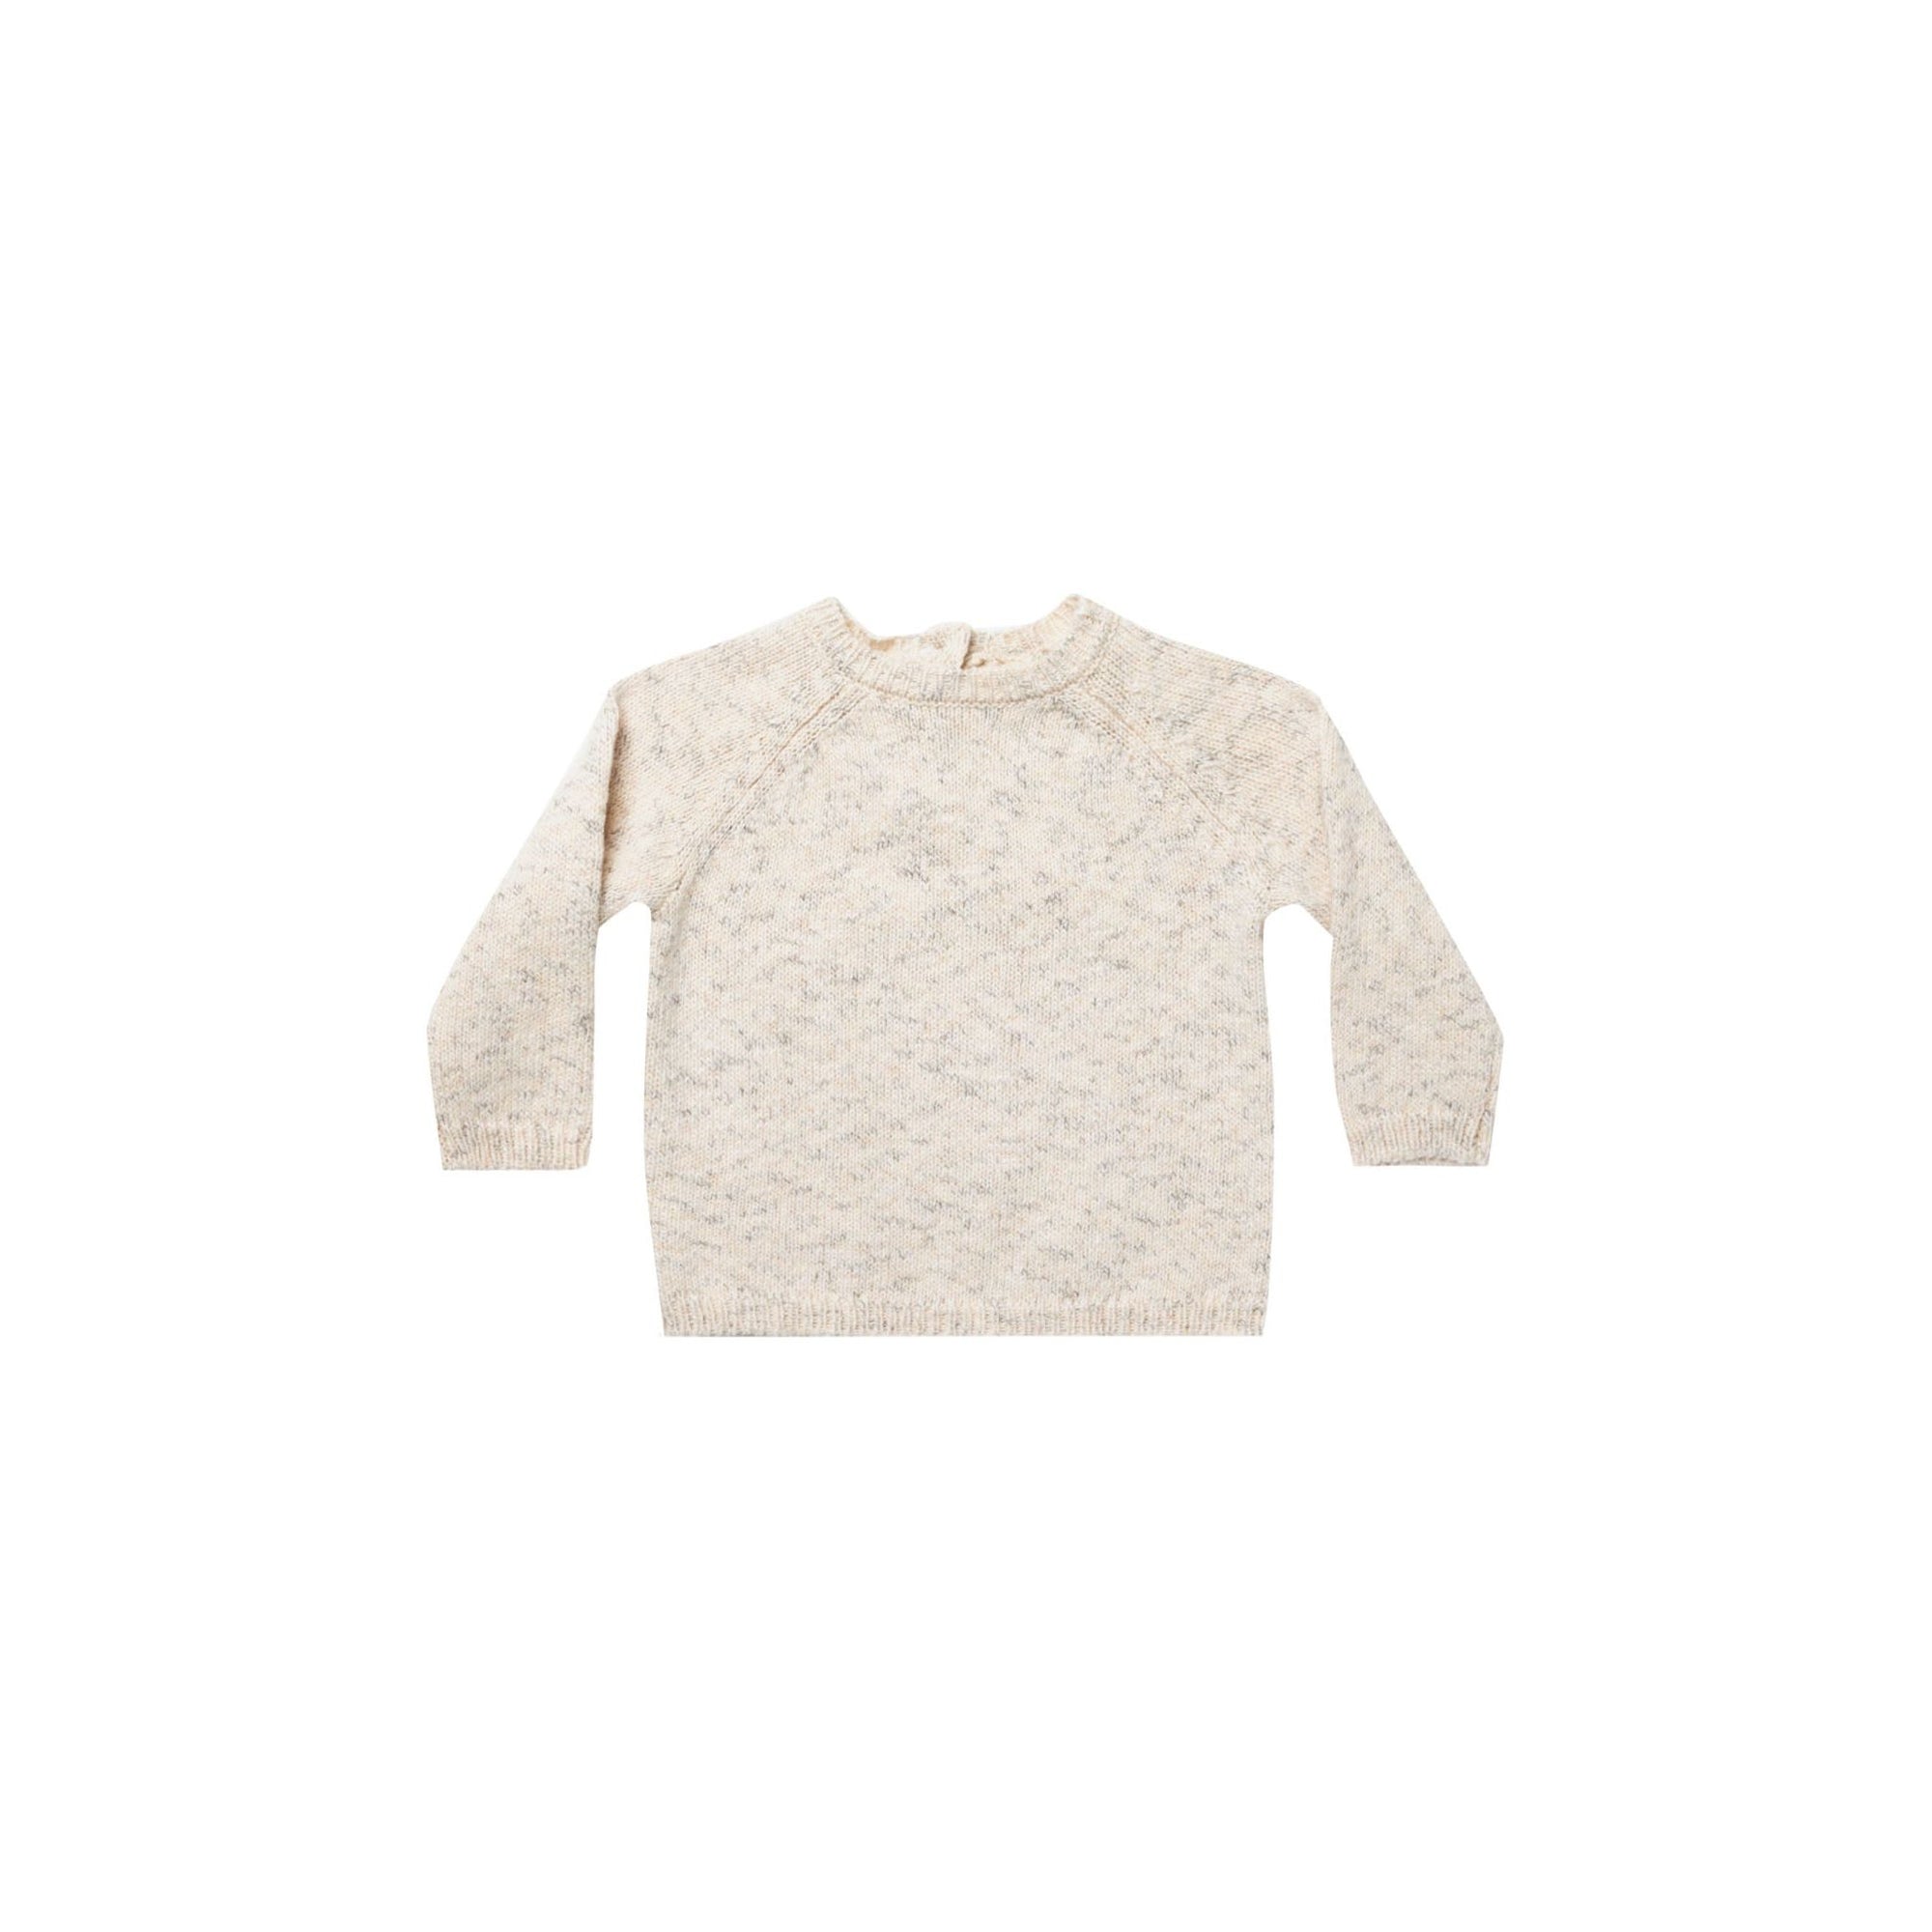 speckled knit sweater || natural